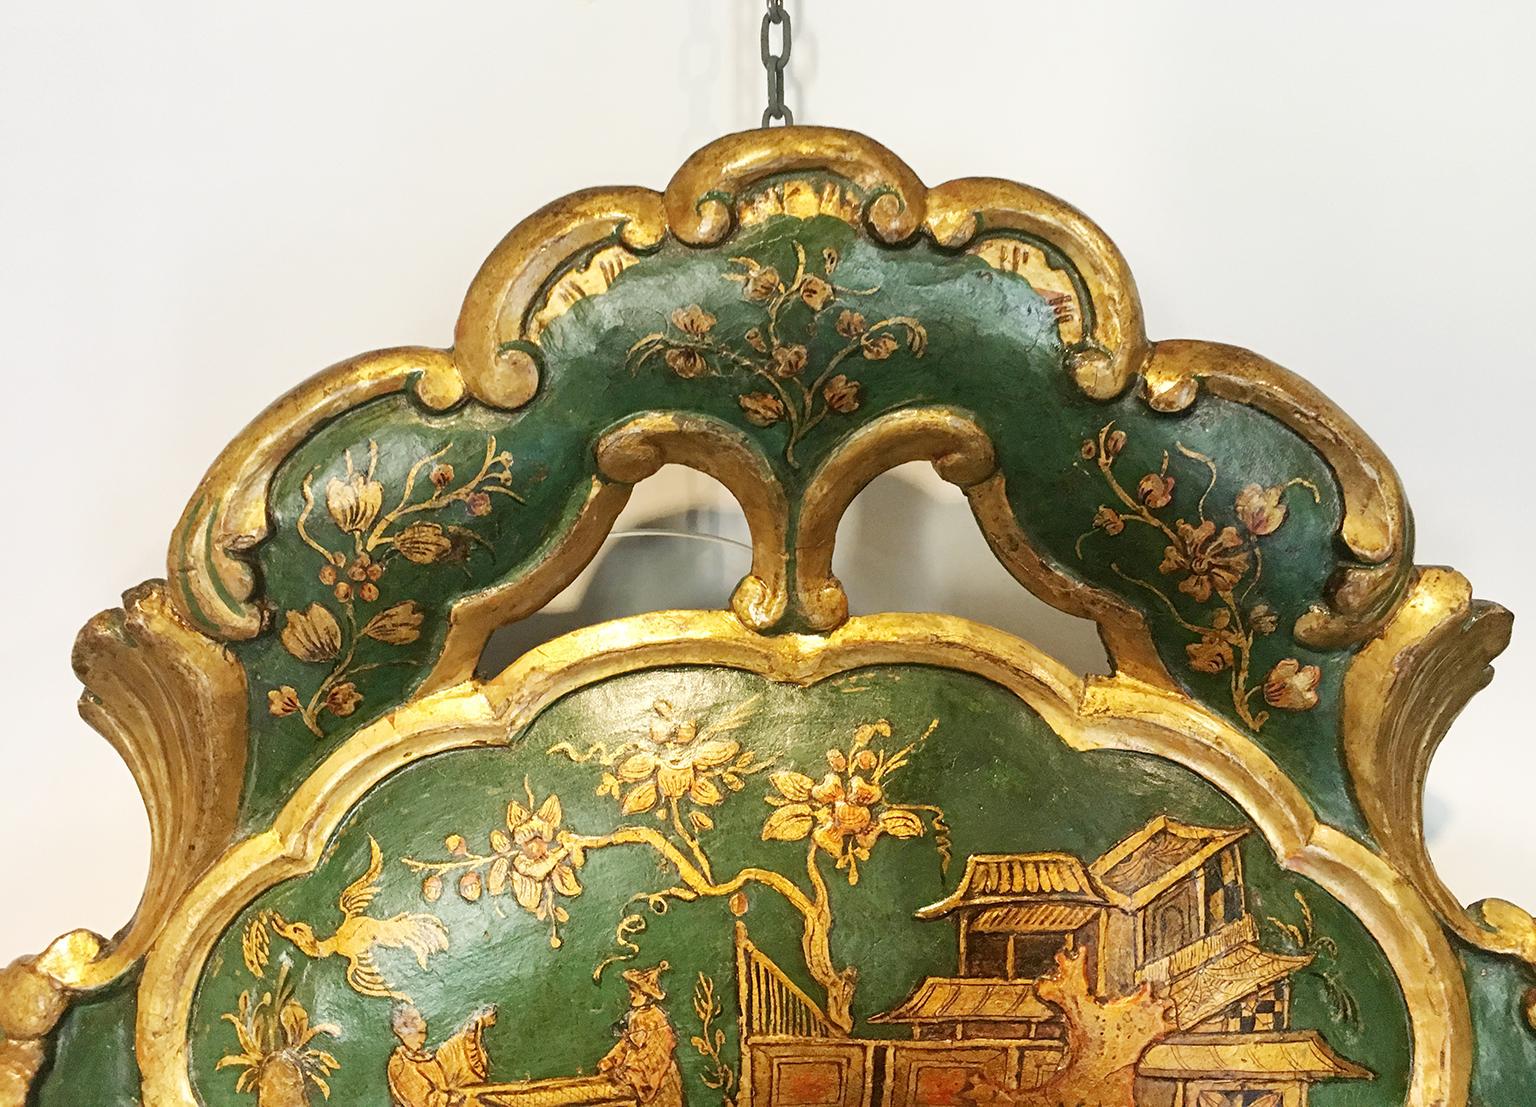 Small carved wooden wall mirror, lacquered and partially gilded with chinoiserie motif
Venice, third quarter of the eighteenth century
It measures 40.15 in x 27.55 in x 3.14 in (102 cm x 70 cm x 9 cm)
15.43 lb (7kg)
State of conservation: There are